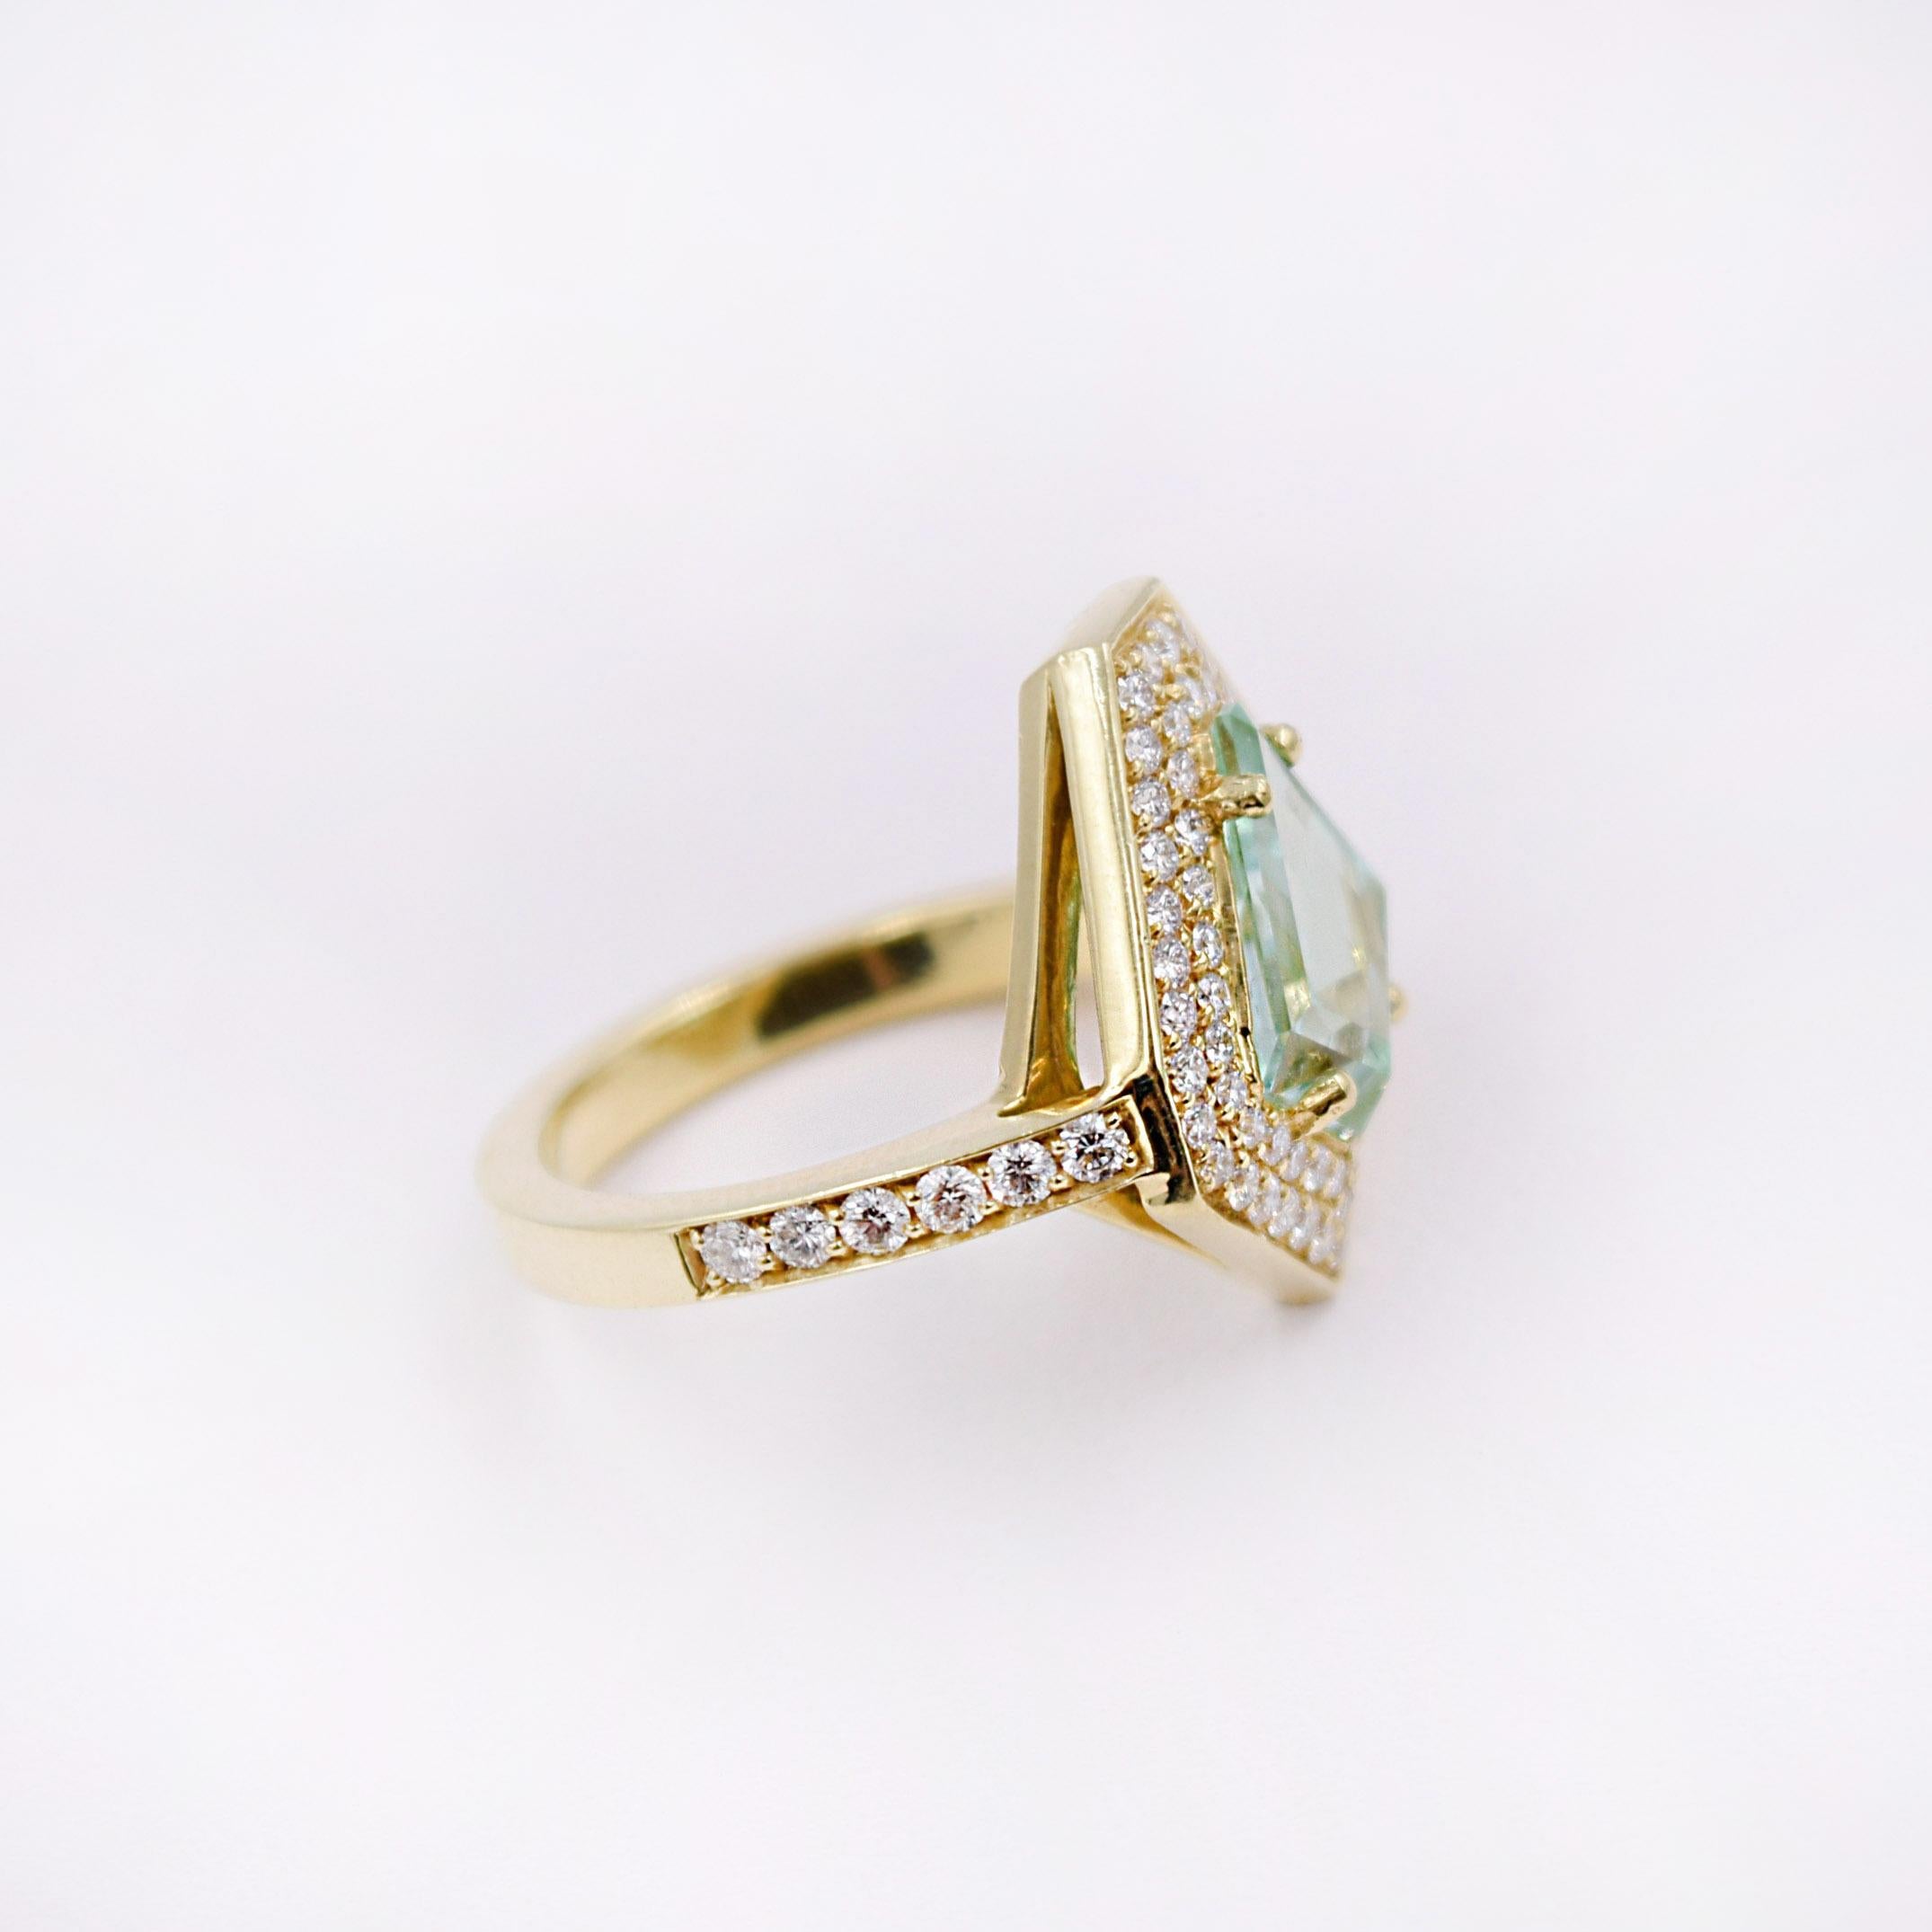 Lauren K. 2.27ct Kite Shaped Mint Tourmaline and Diamond Cocktail Ring 18K Gold In New Condition For Sale In Mill Valley, CA